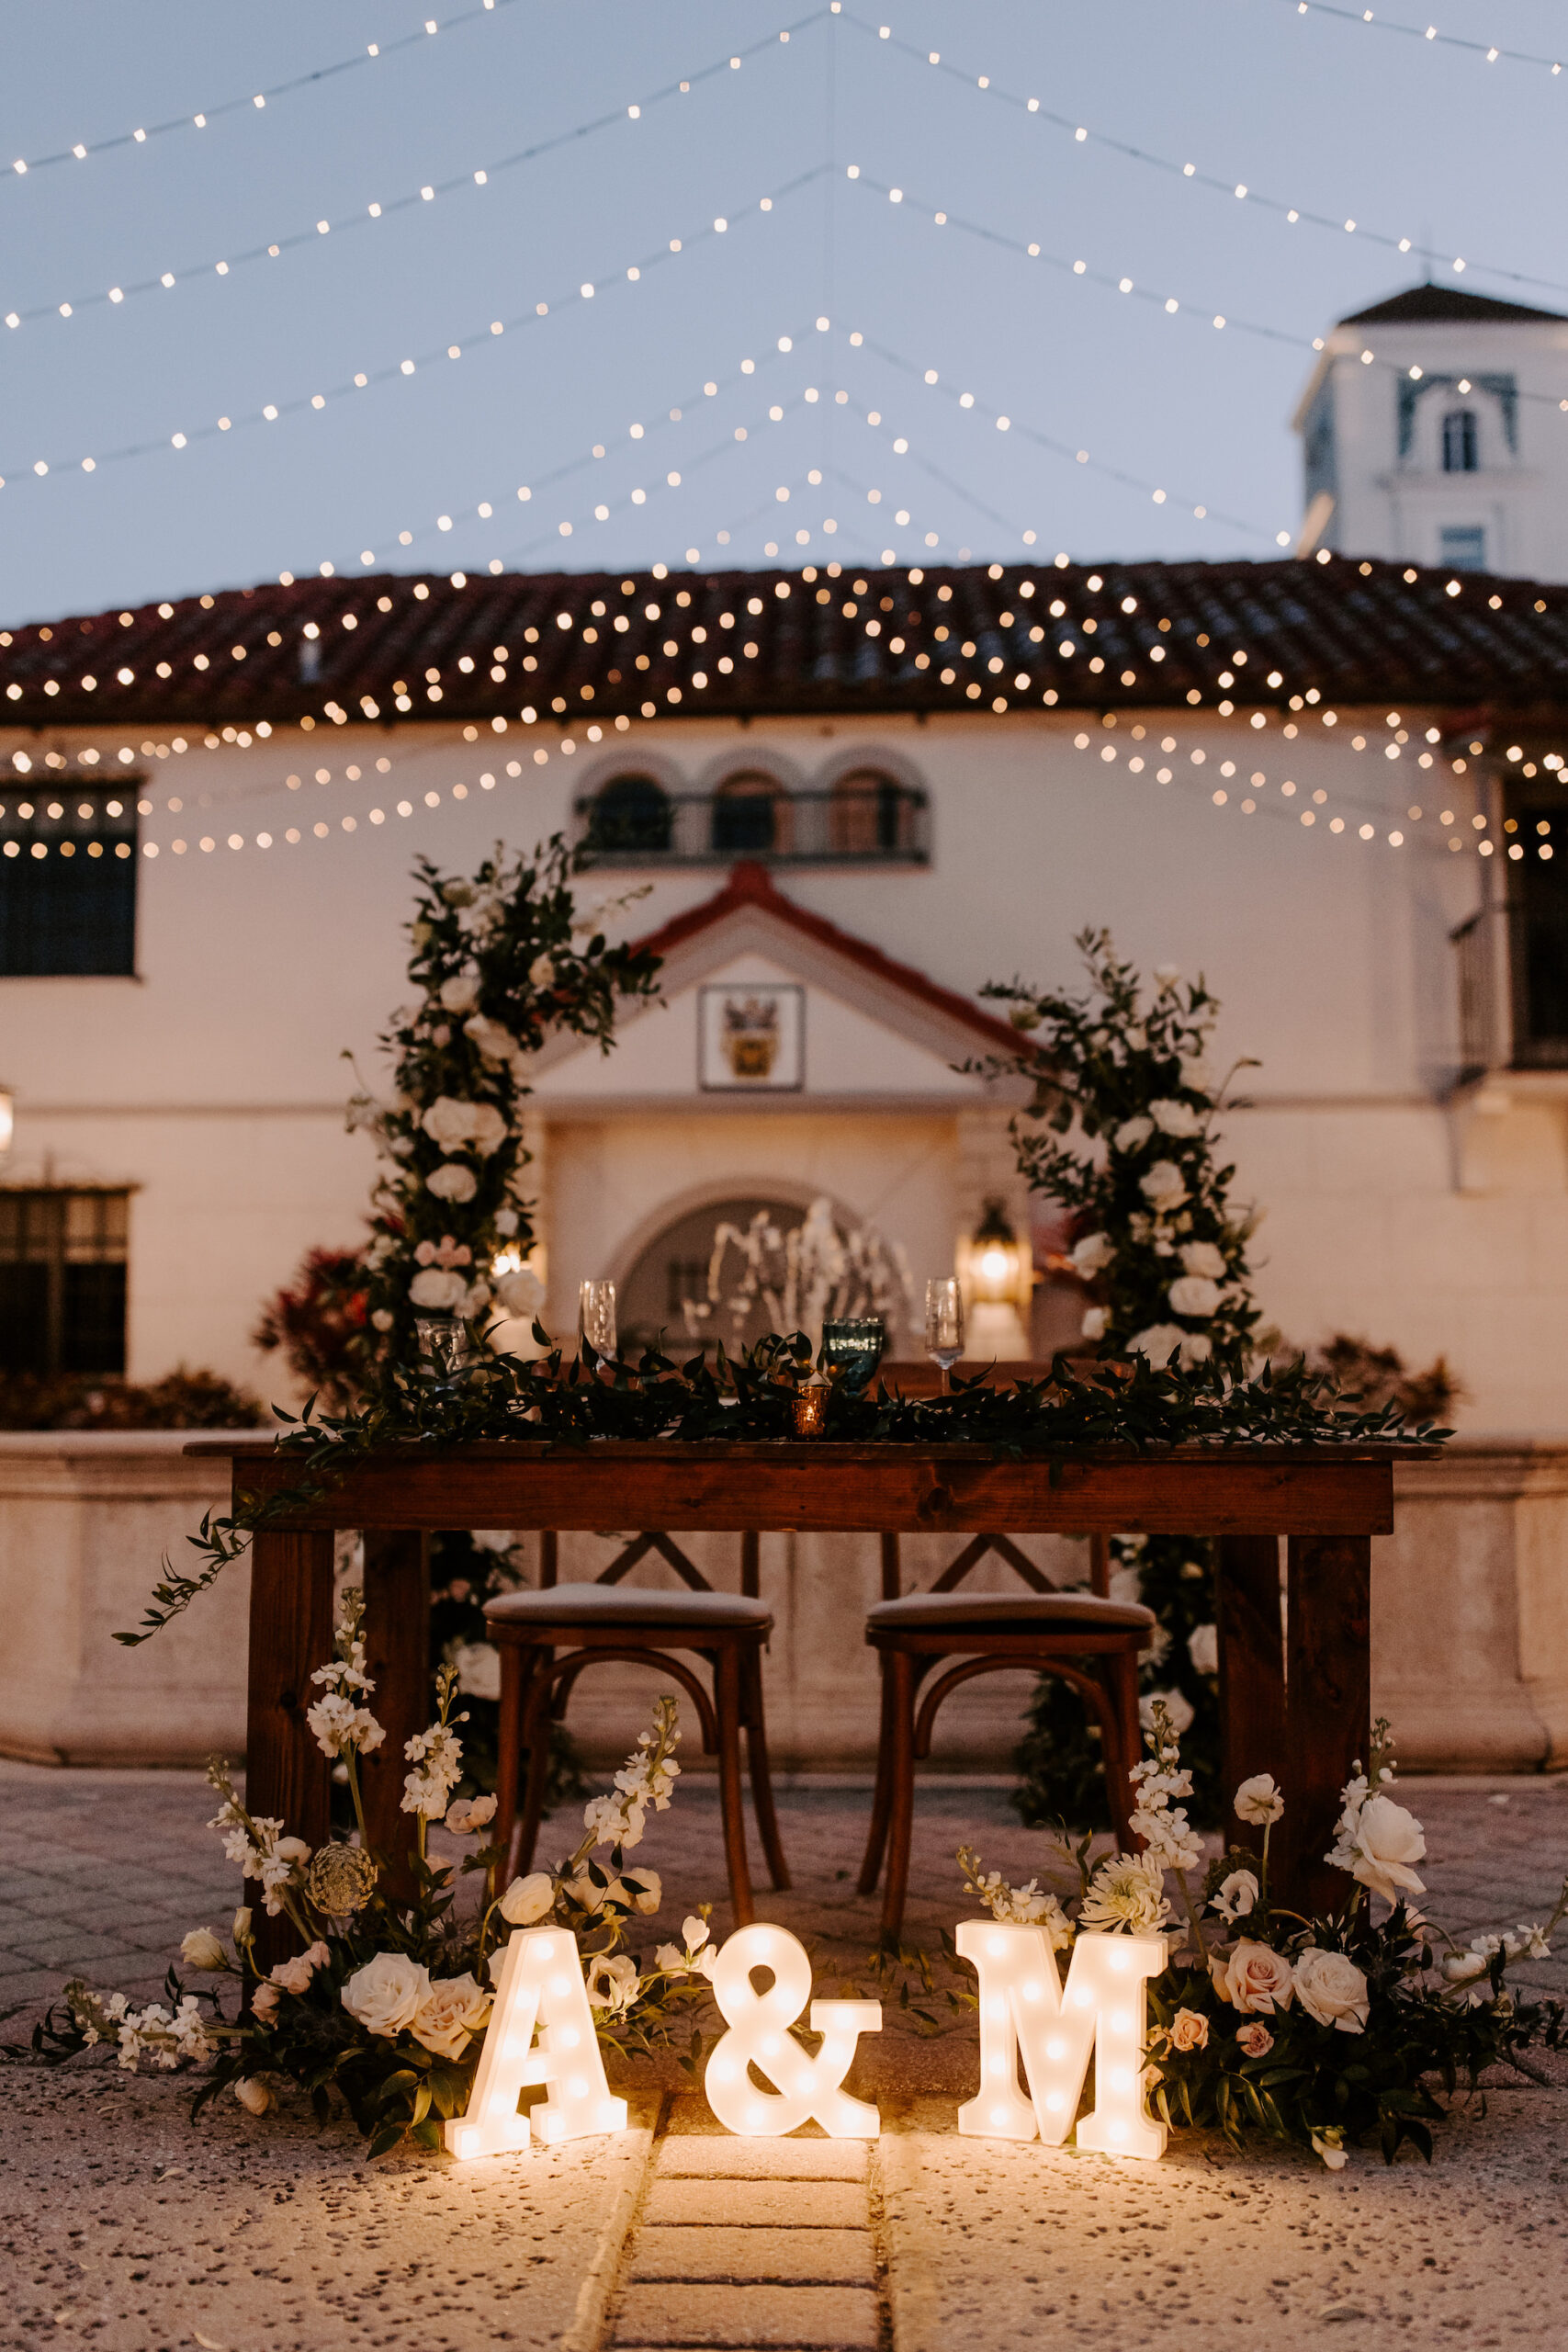 Rustic Sweetheart Head Table Ideas | Outdoor Romantic Wedding Reception Decor | Market Lights | Light Up Marquee Letters | White Rose and Greenery Floral Arrangements